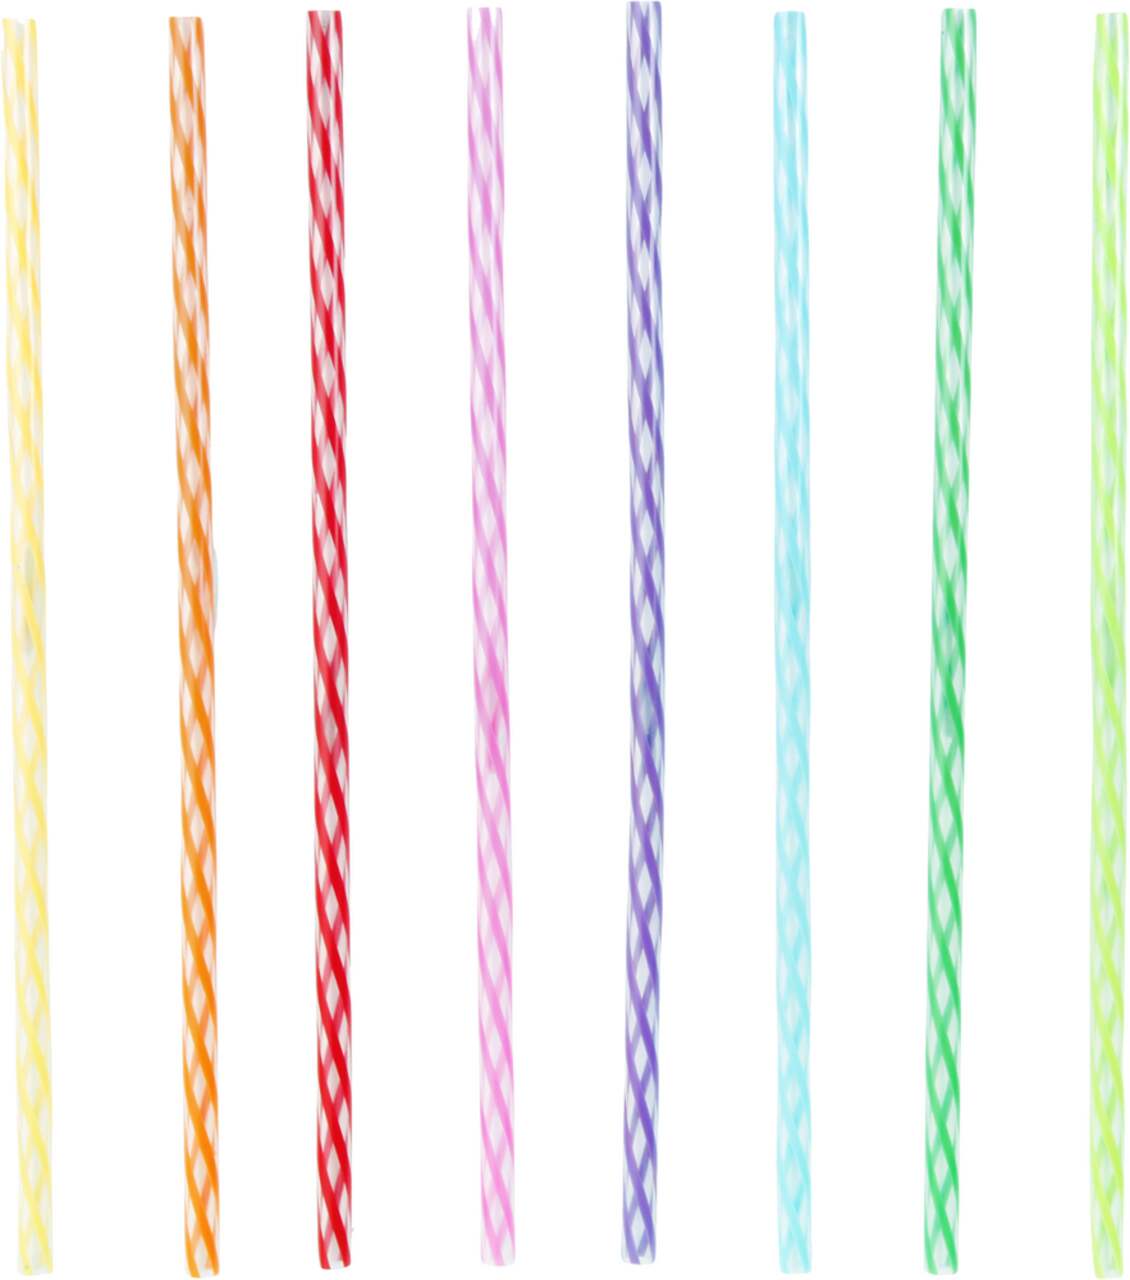 https://media-www.canadiantire.ca/product/seasonal-gardening/party-city-everyday/party-city-dining-entertaining/8429904/rainbow-reusable-straws-24ct-45656939-5a68-4786-9a6b-491212bcf602.png?imdensity=1&imwidth=640&impolicy=mZoom